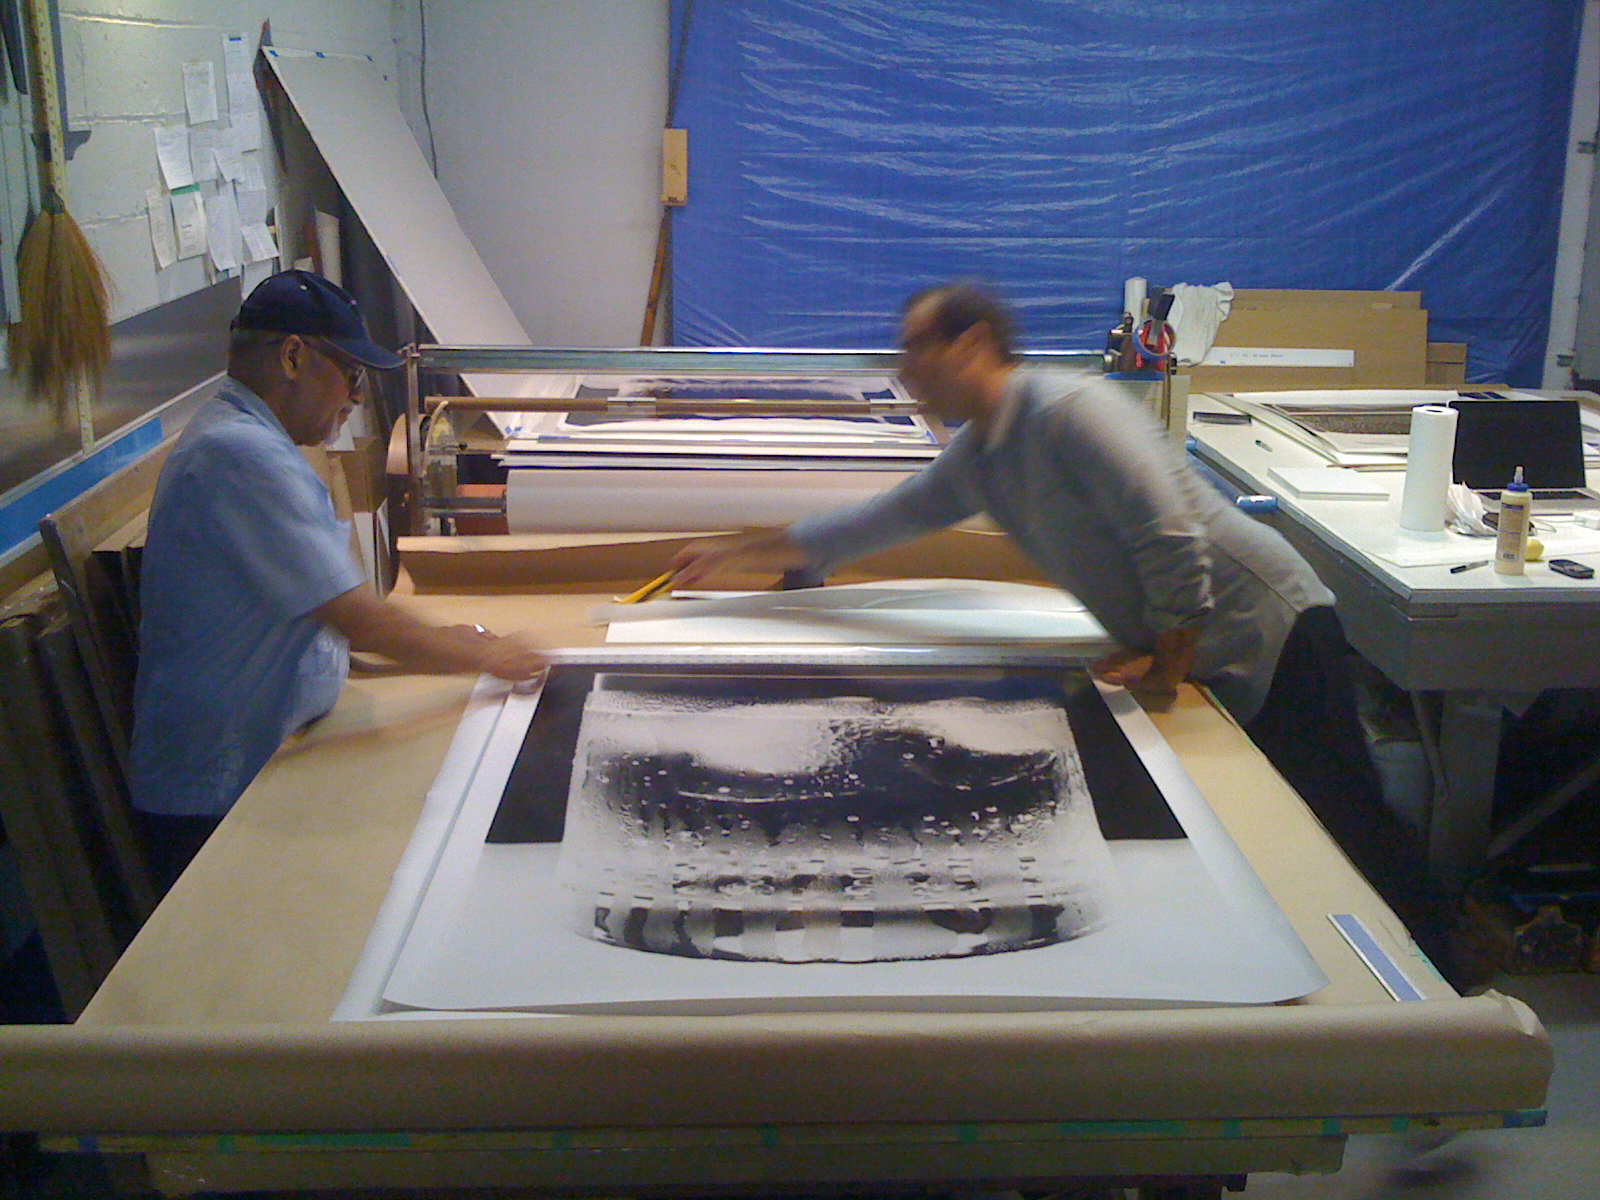 50" x 40" prints being mounted for Glass + Light exhibition.